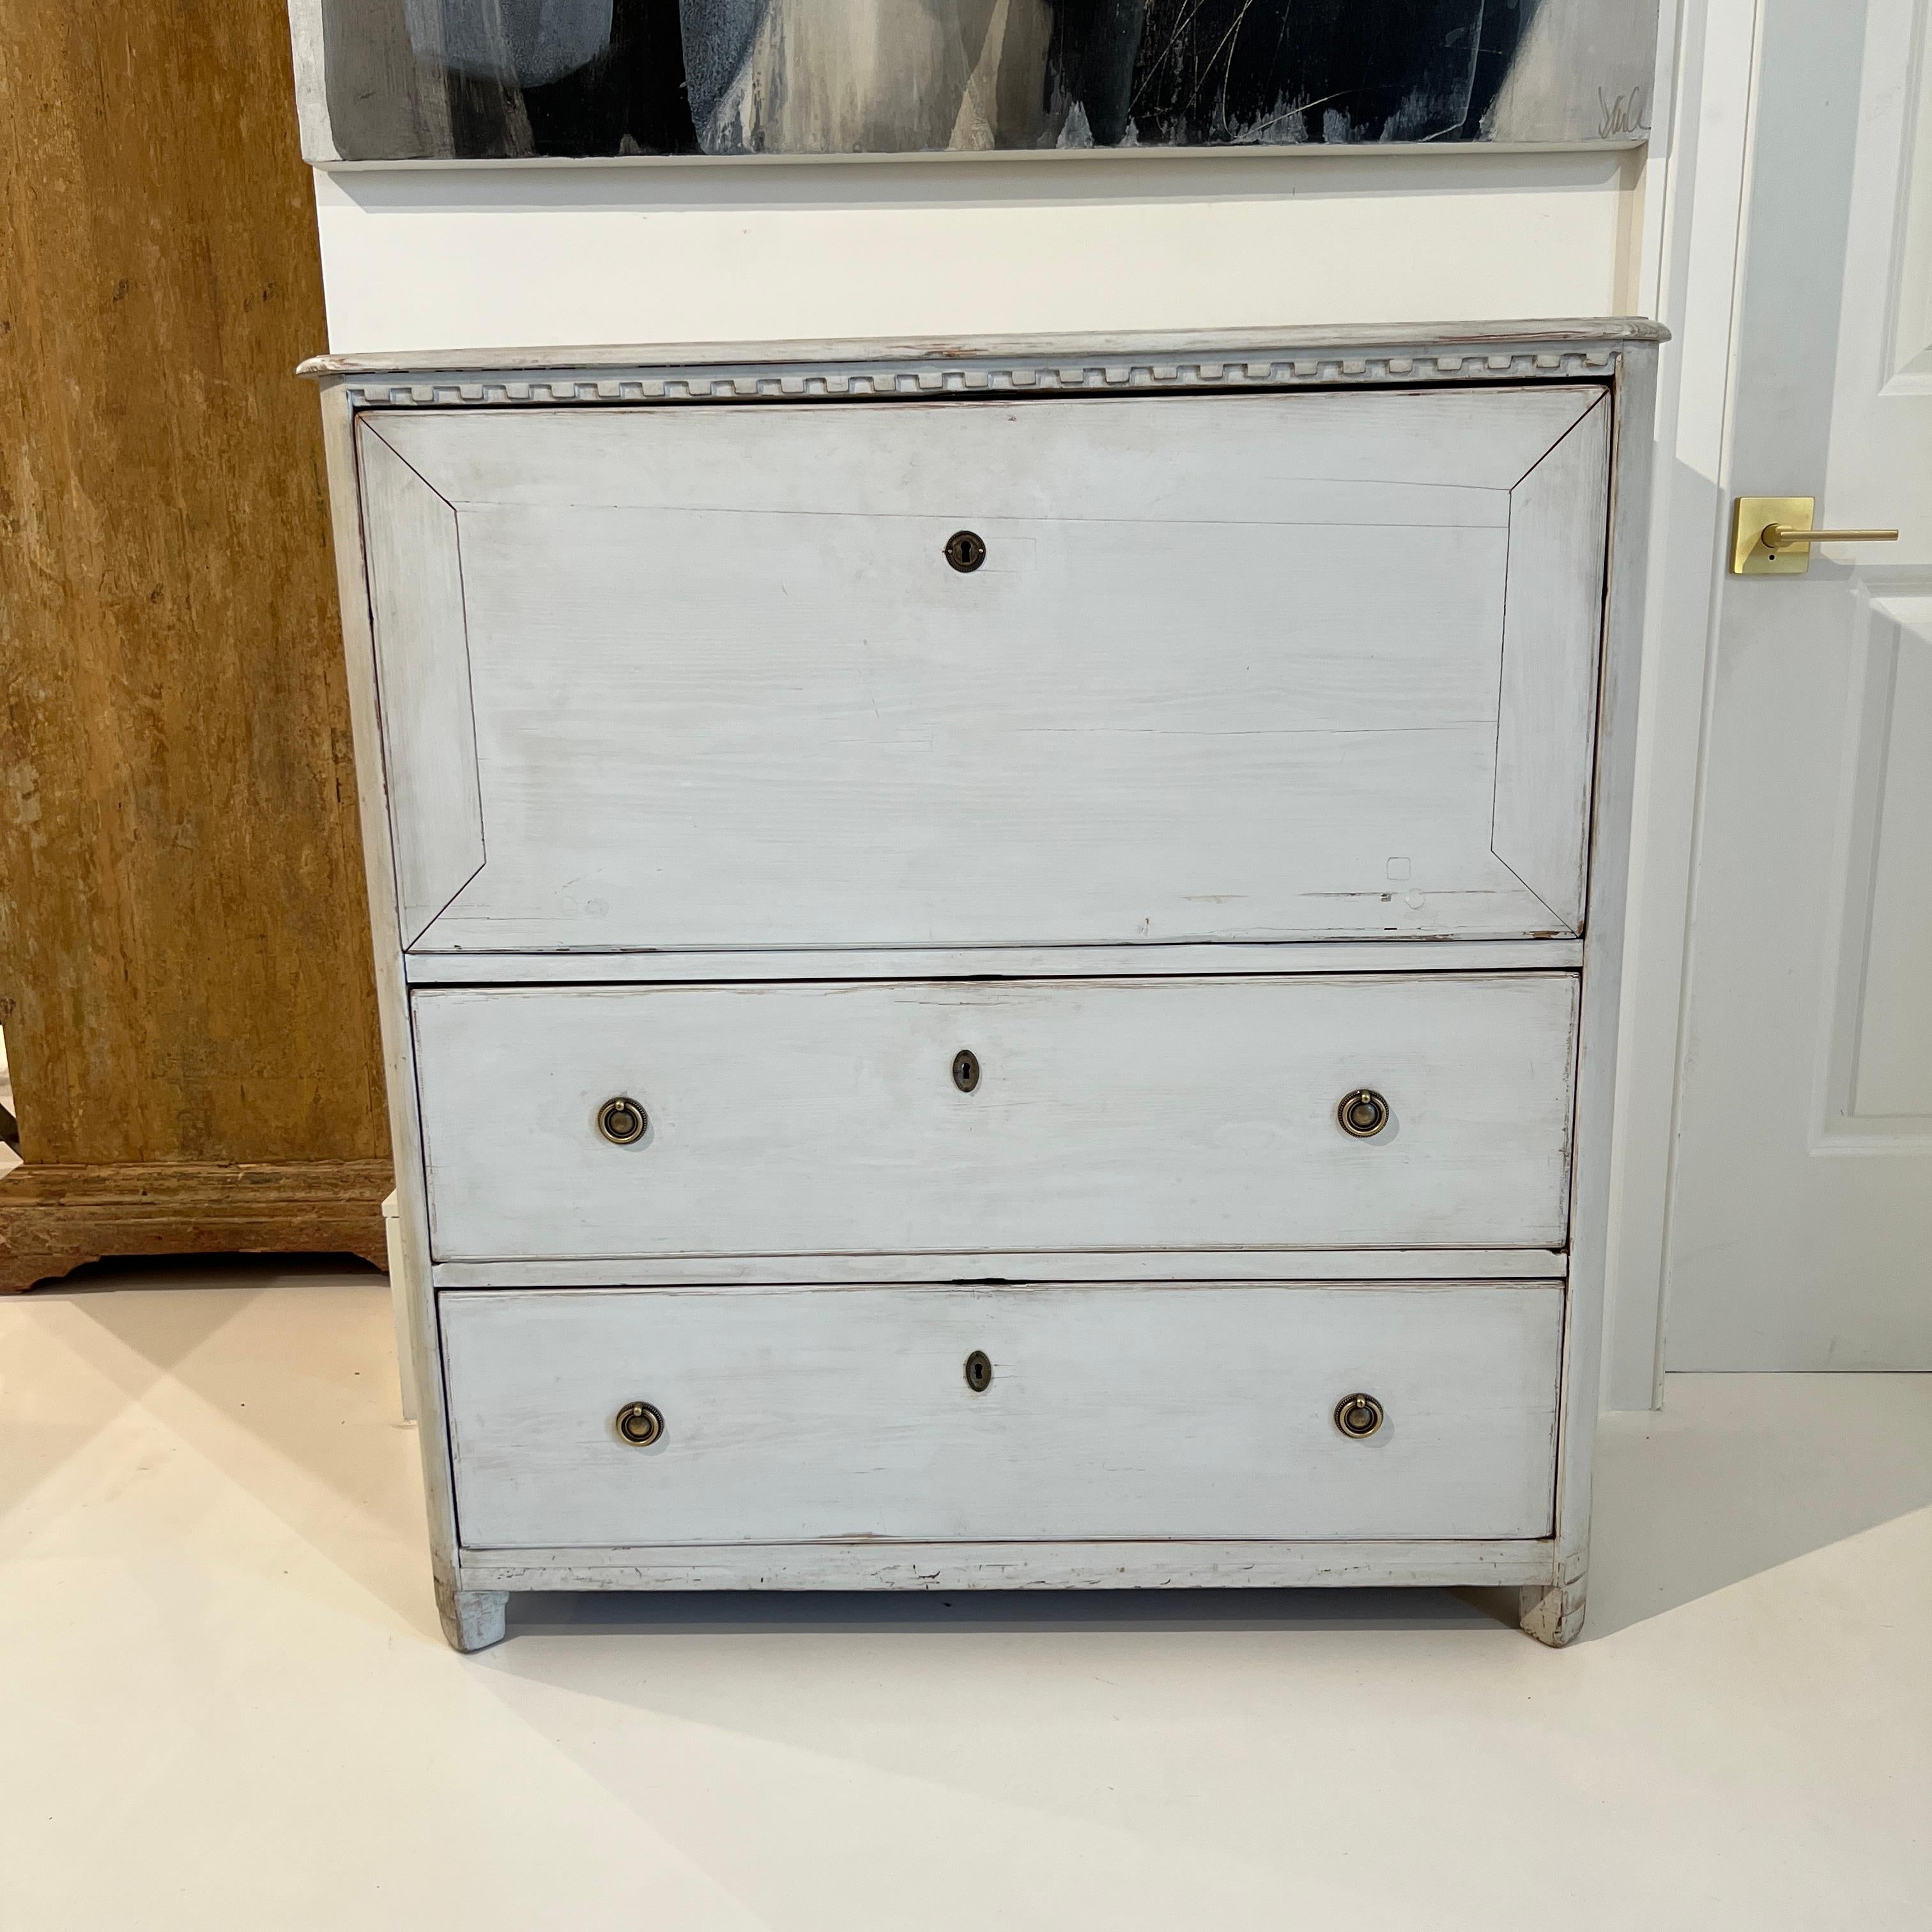 This Gustavian style desk is a peerless lesson in elegant restraint.  The simple exterior, when opened, reveals generous interior storage and ample work space.  The joy of this desk is that when your work is finished, you close it and quiet